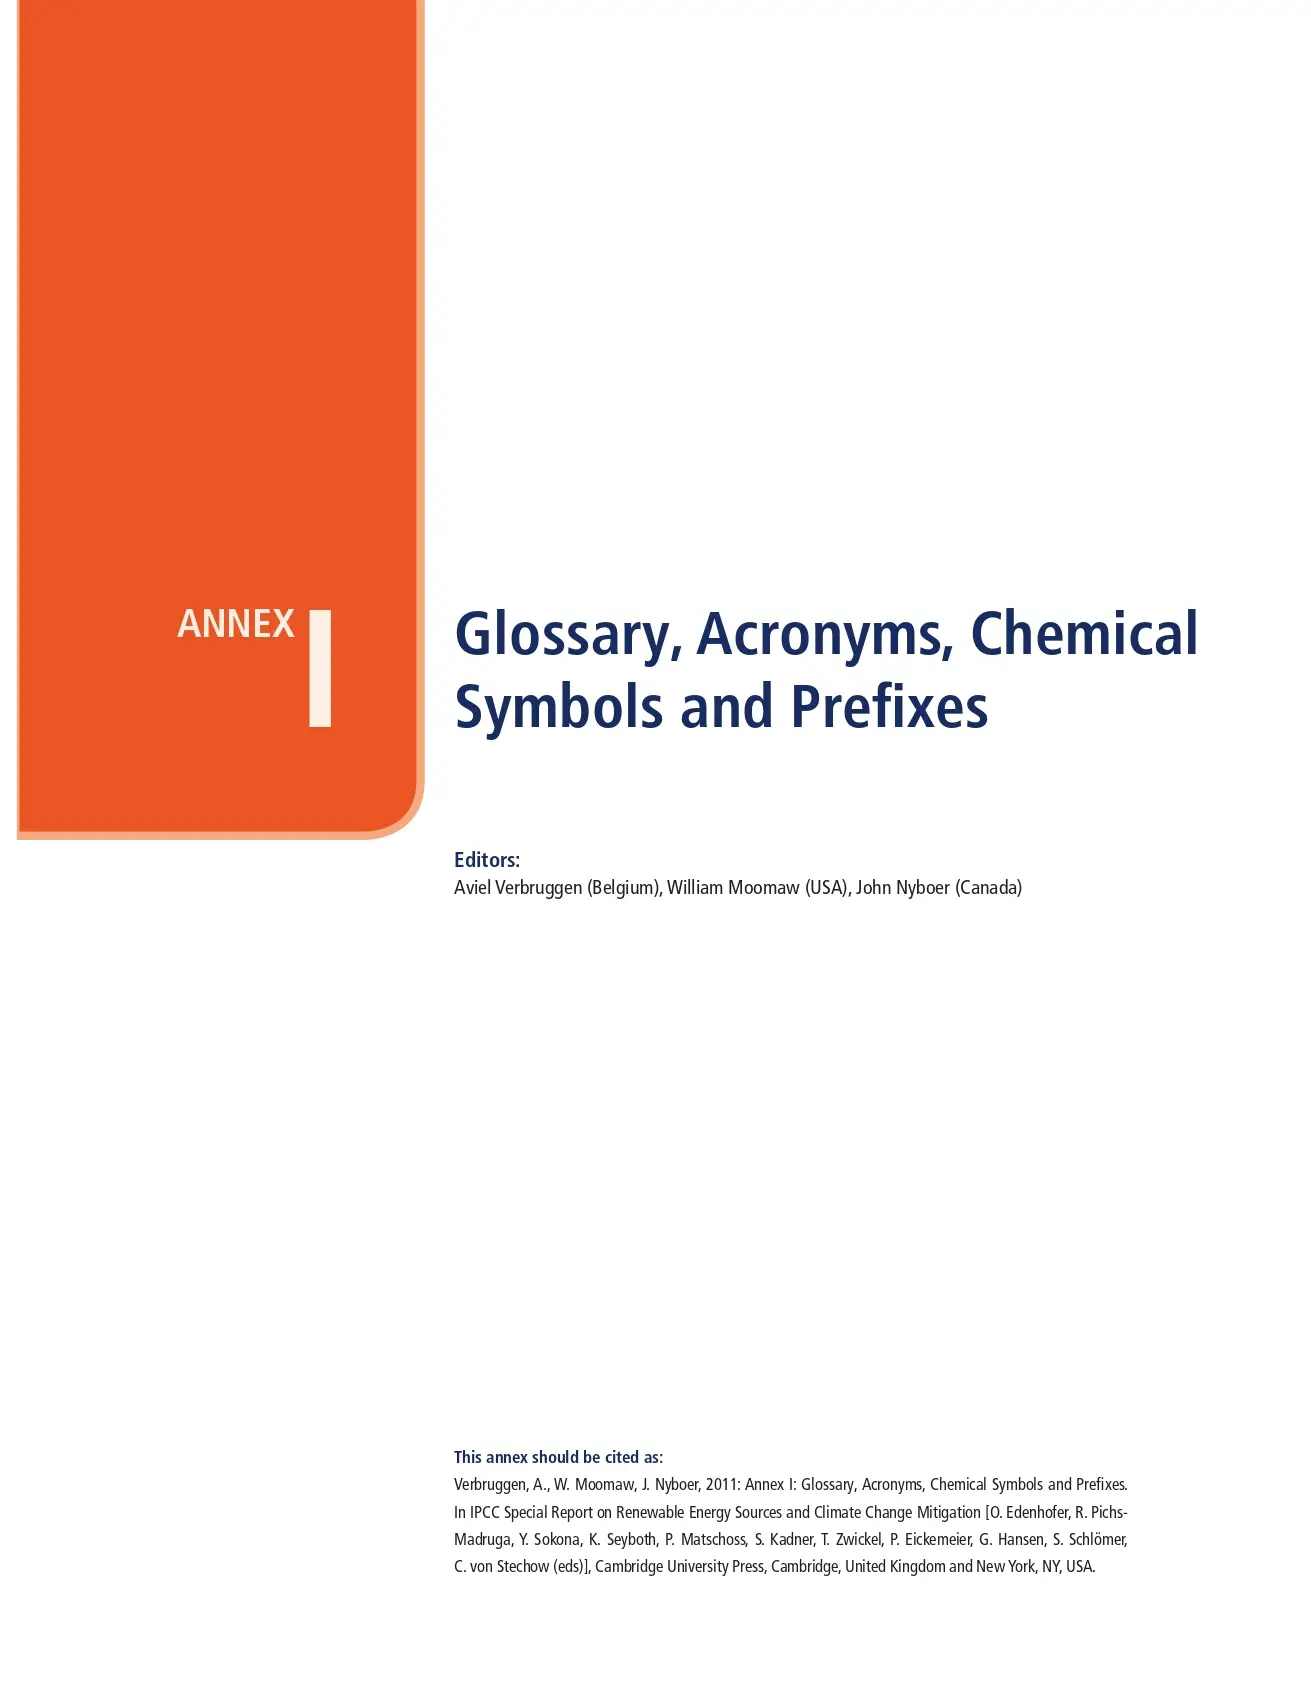 Glossary, Acronyms, Chemical Symbols And Prefixes